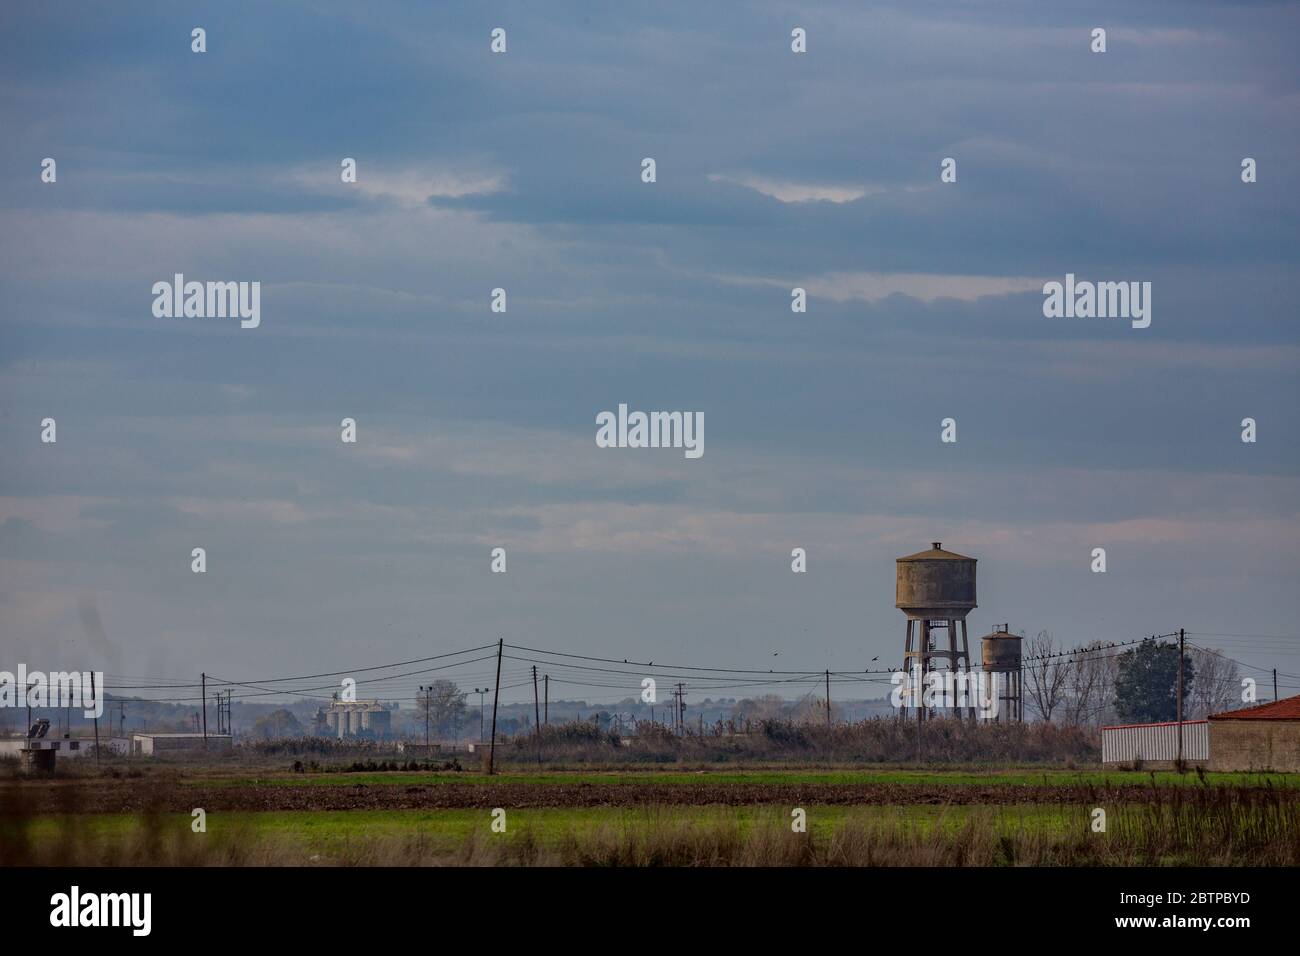 Hazy midday hot daytime landscape from far away with haze of village of Nea Kessani, Xanthi region, Northern Greece with water tower and industrial zone Stock Photo